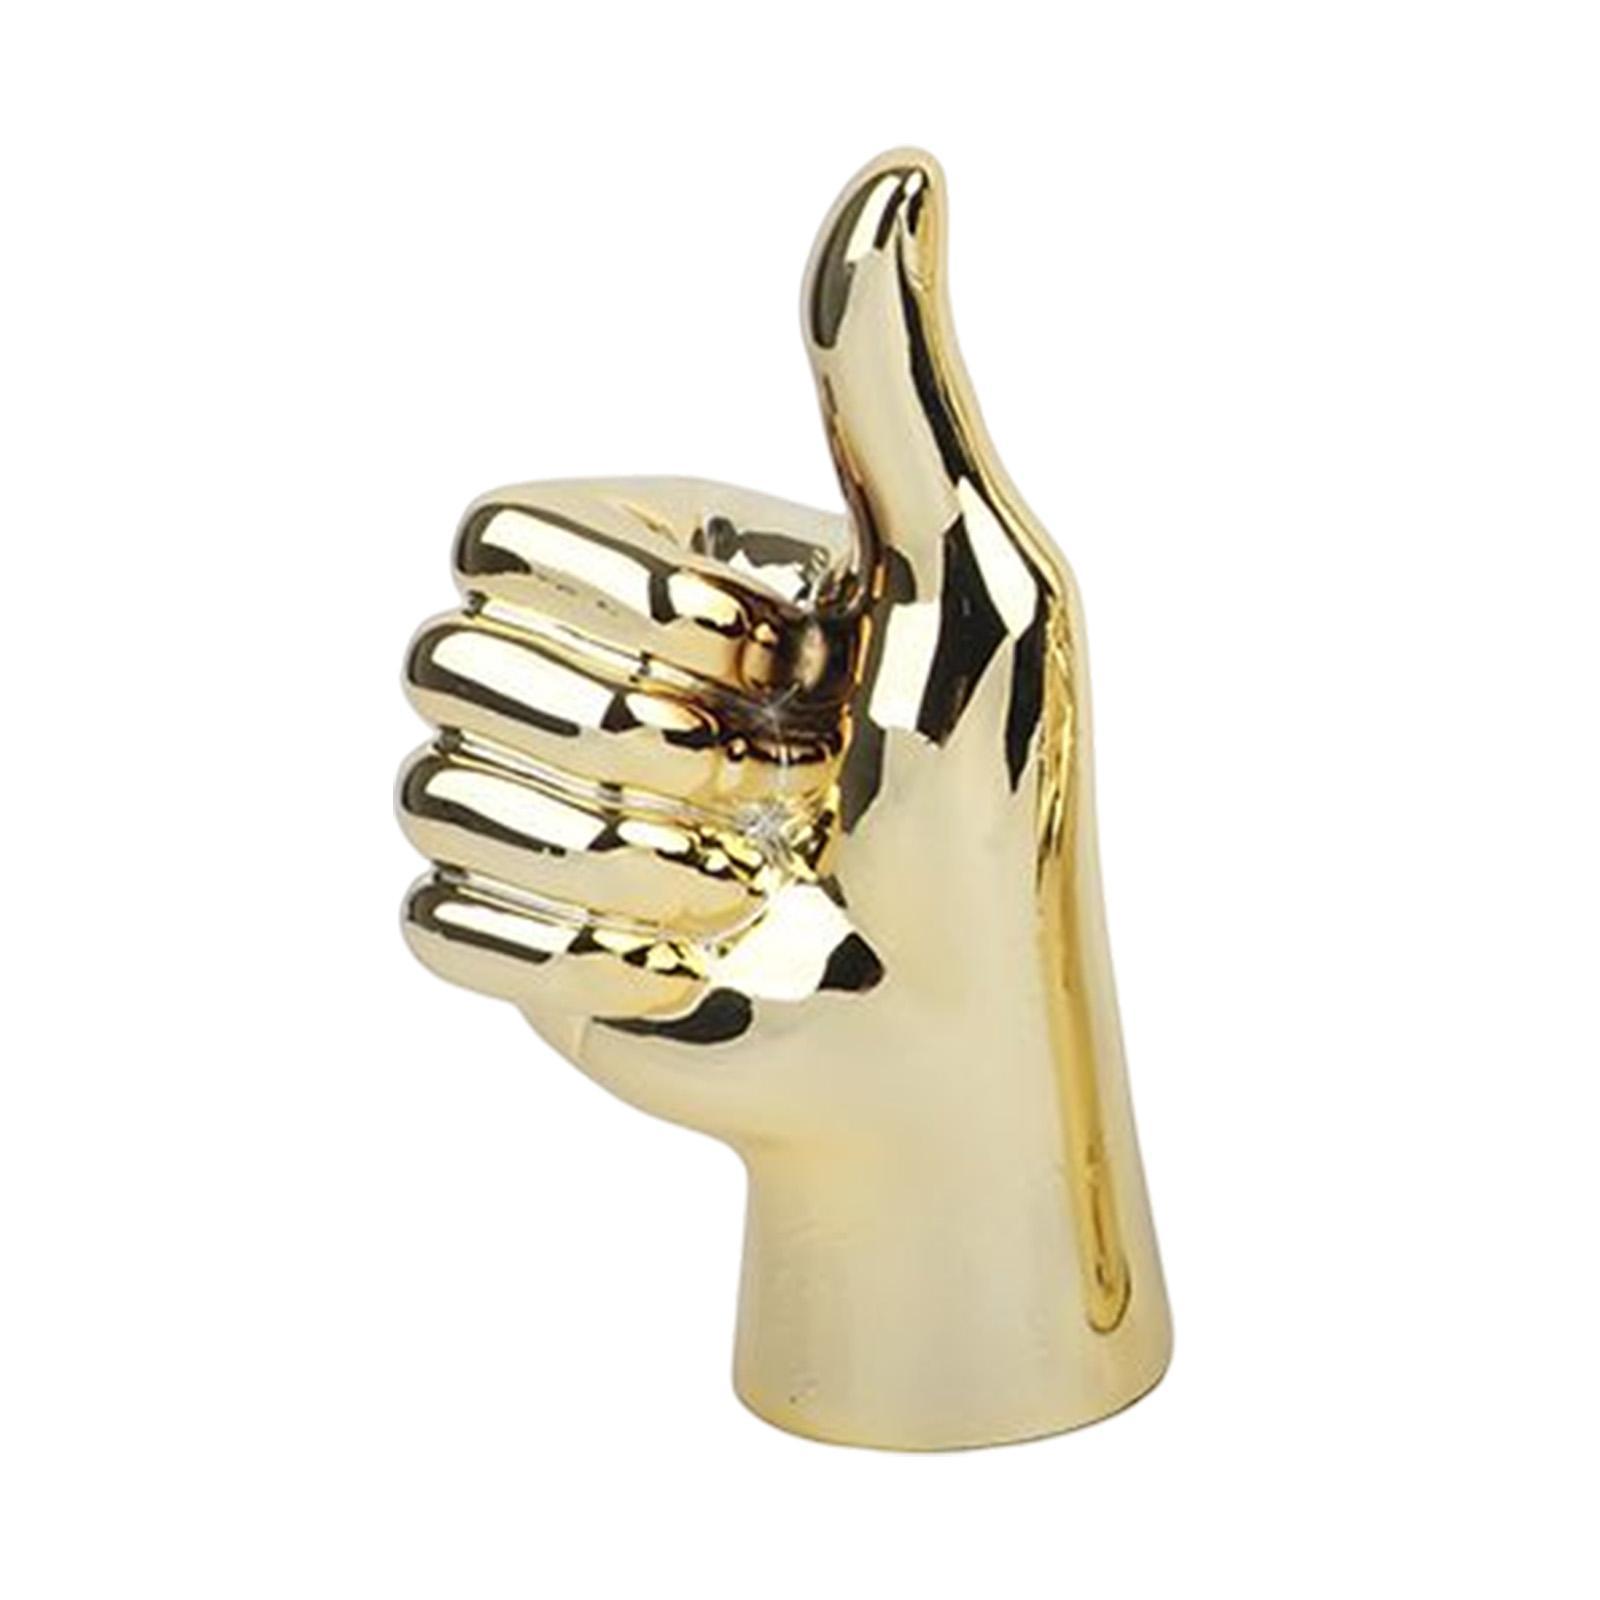 Hand Gesture Statue Creative Hand Sculpture for Home Table Centerpiece Decor